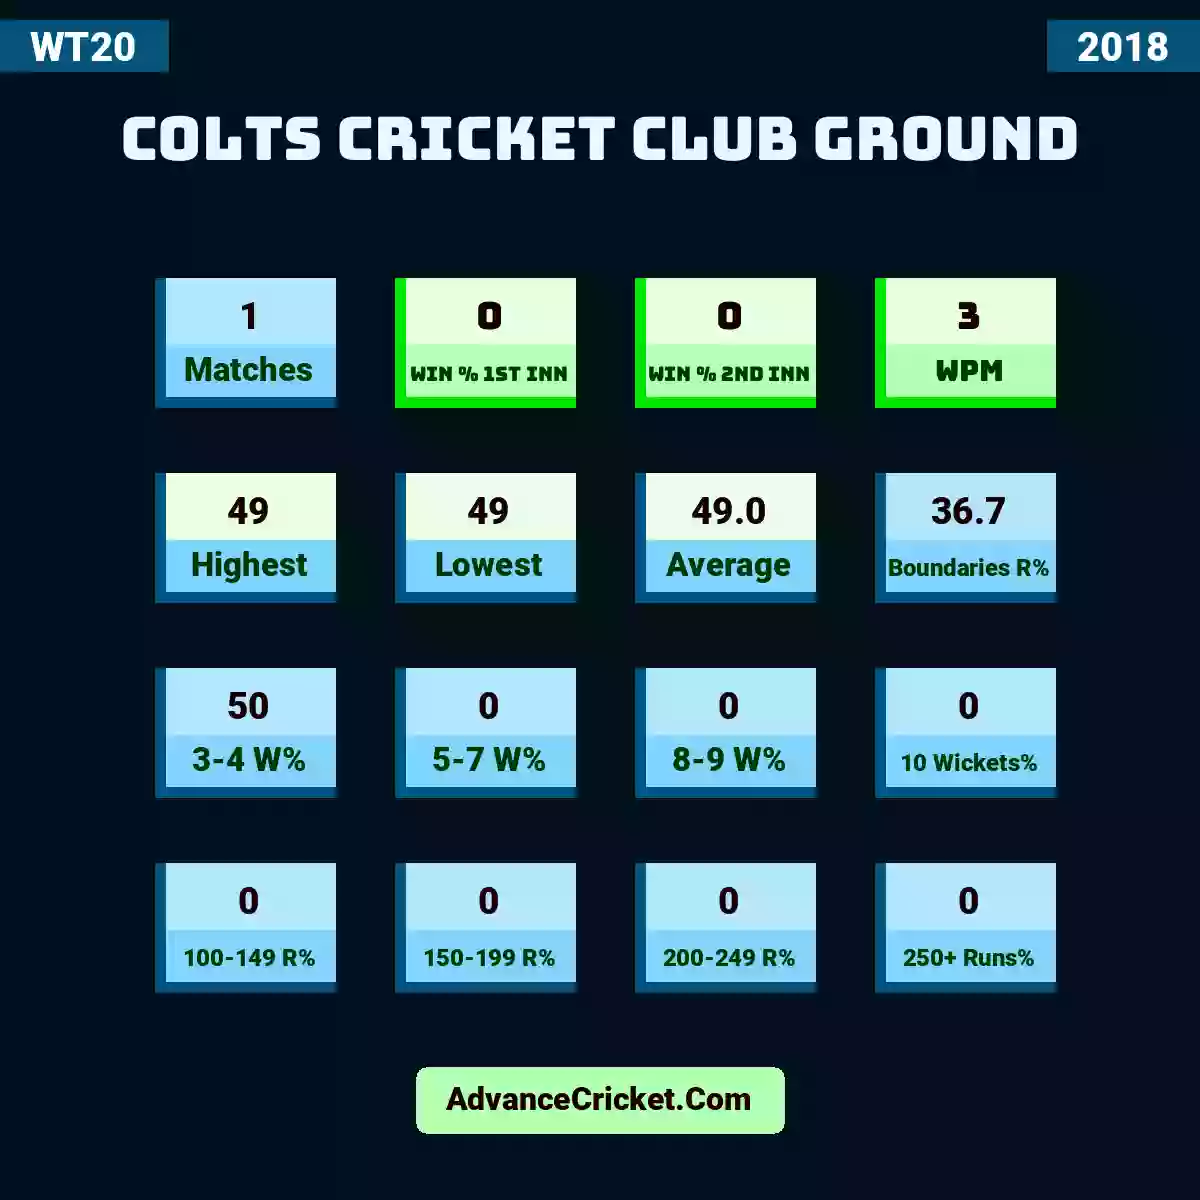 Image showing Colts Cricket Club Ground with Matches: 1, Win % 1st Inn: 0, Win % 2nd Inn: 0, WPM: 3, Highest: 49, Lowest: 49, Average: 49.0, Boundaries R%: 36.7, 3-4 W%: 50, 5-7 W%: 0, 8-9 W%: 0, 10 Wickets%: 0, 100-149 R%: 0, 150-199 R%: 0, 200-249 R%: 0, 250+ Runs%: 0.